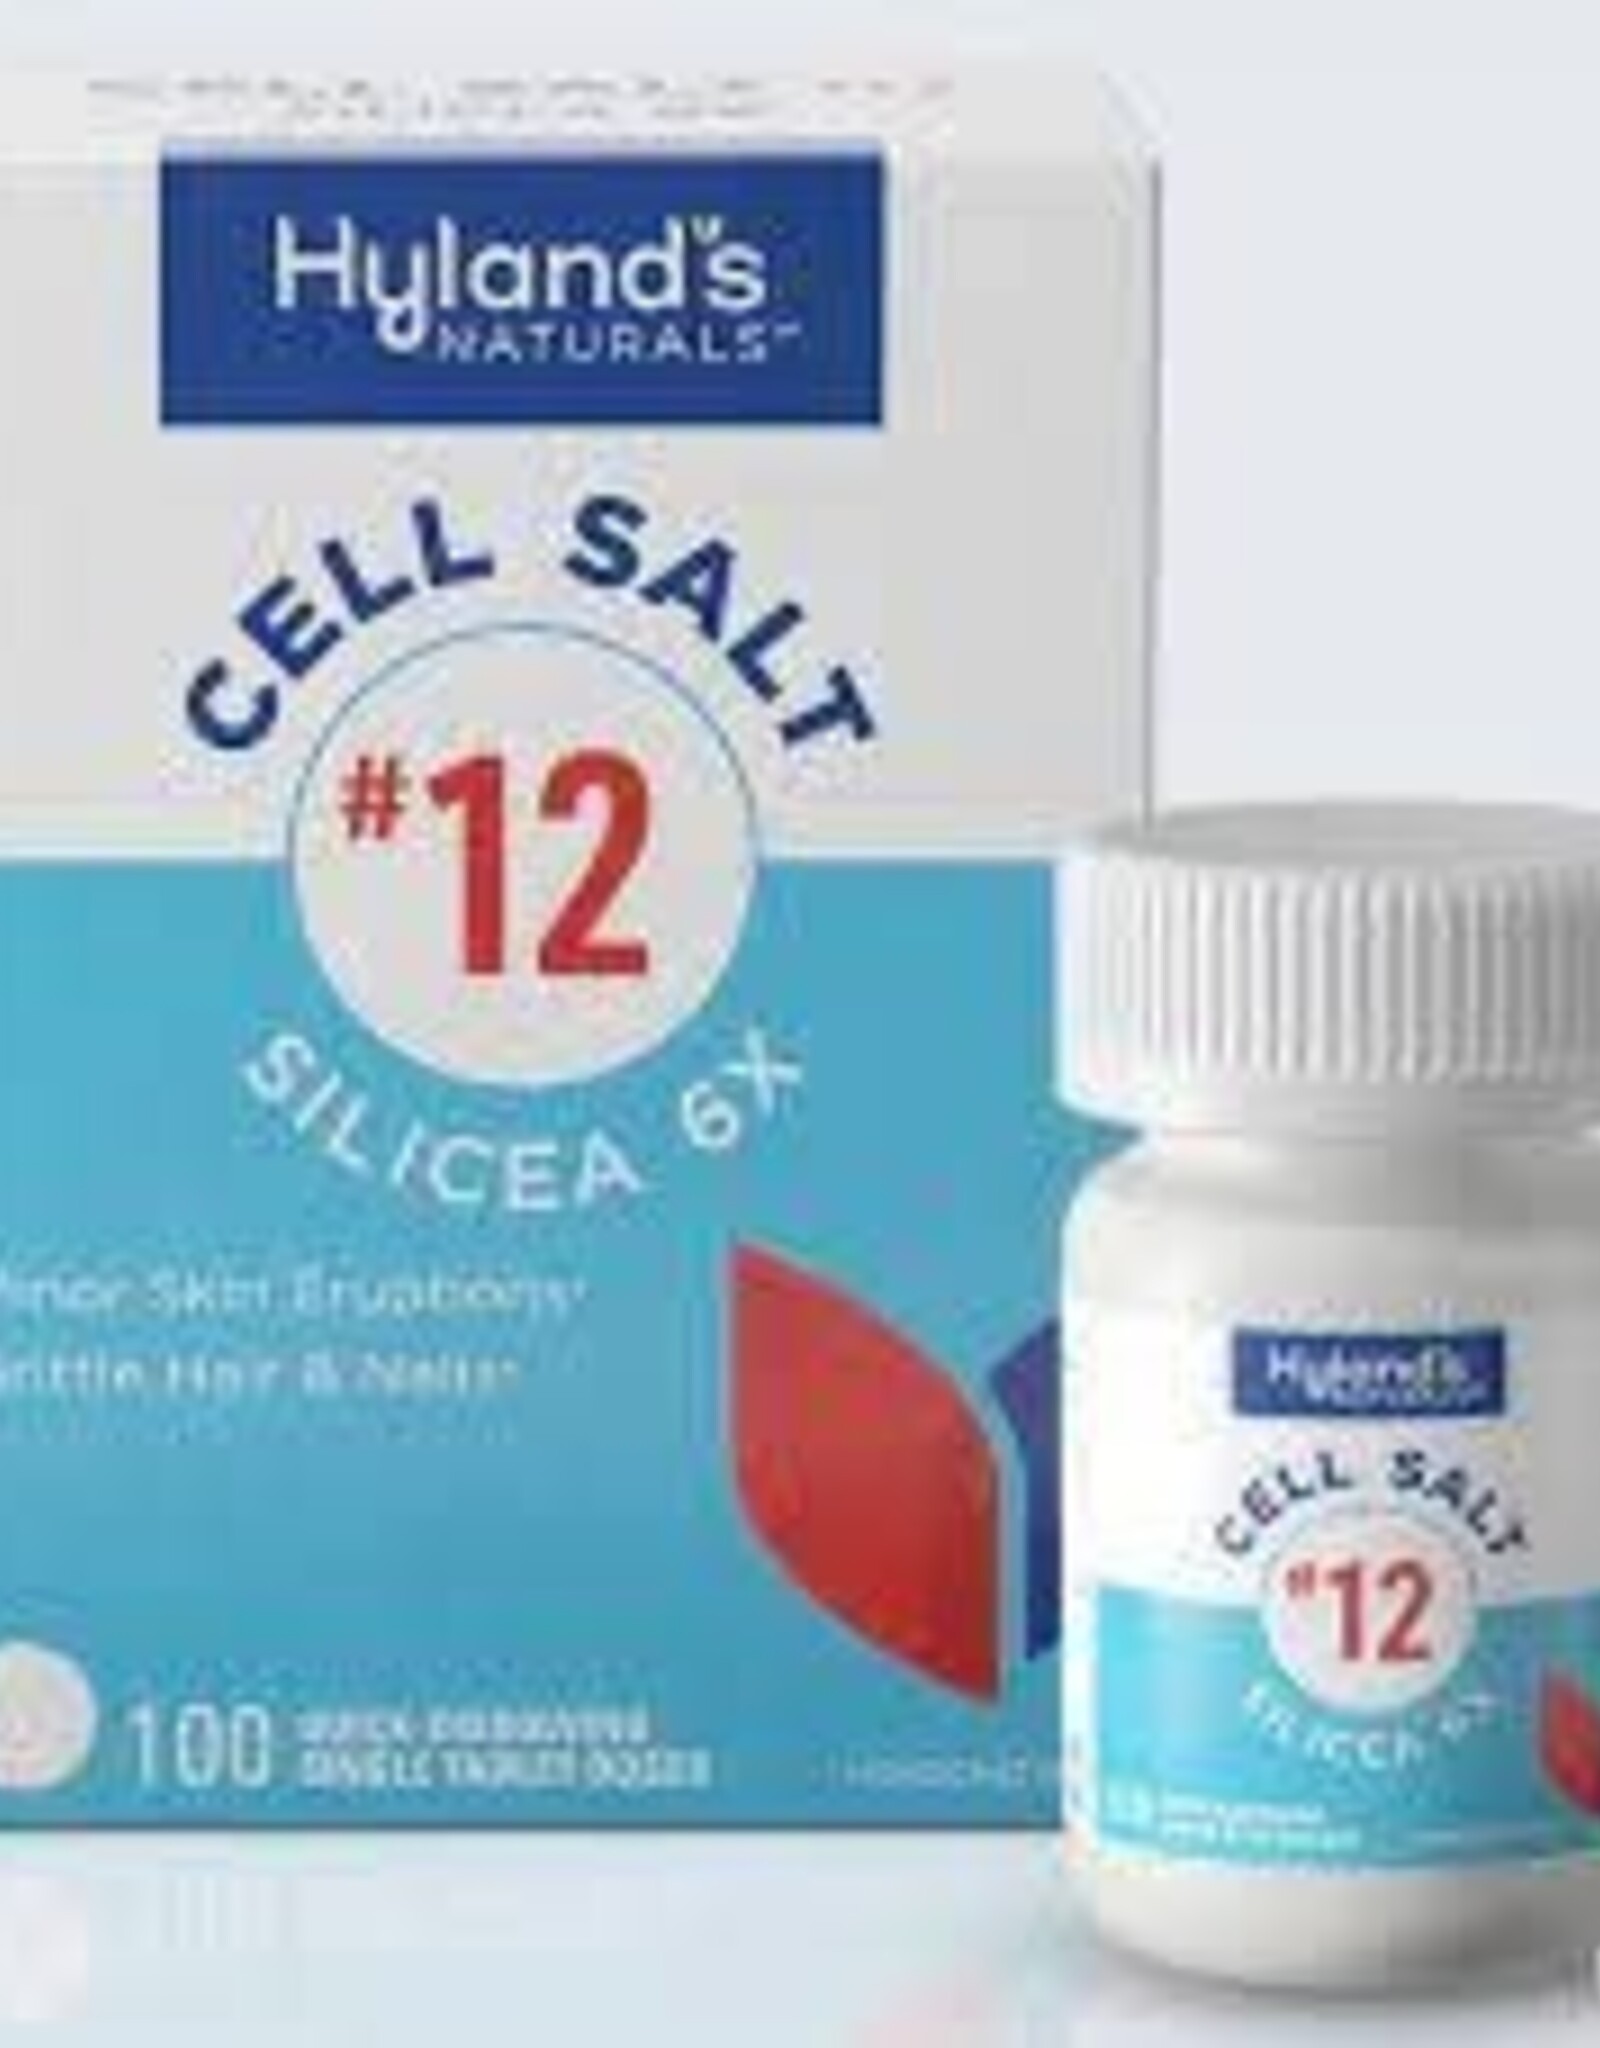 Hyland's Hyland's Cell Salts - 100 tablet #12 Silicea